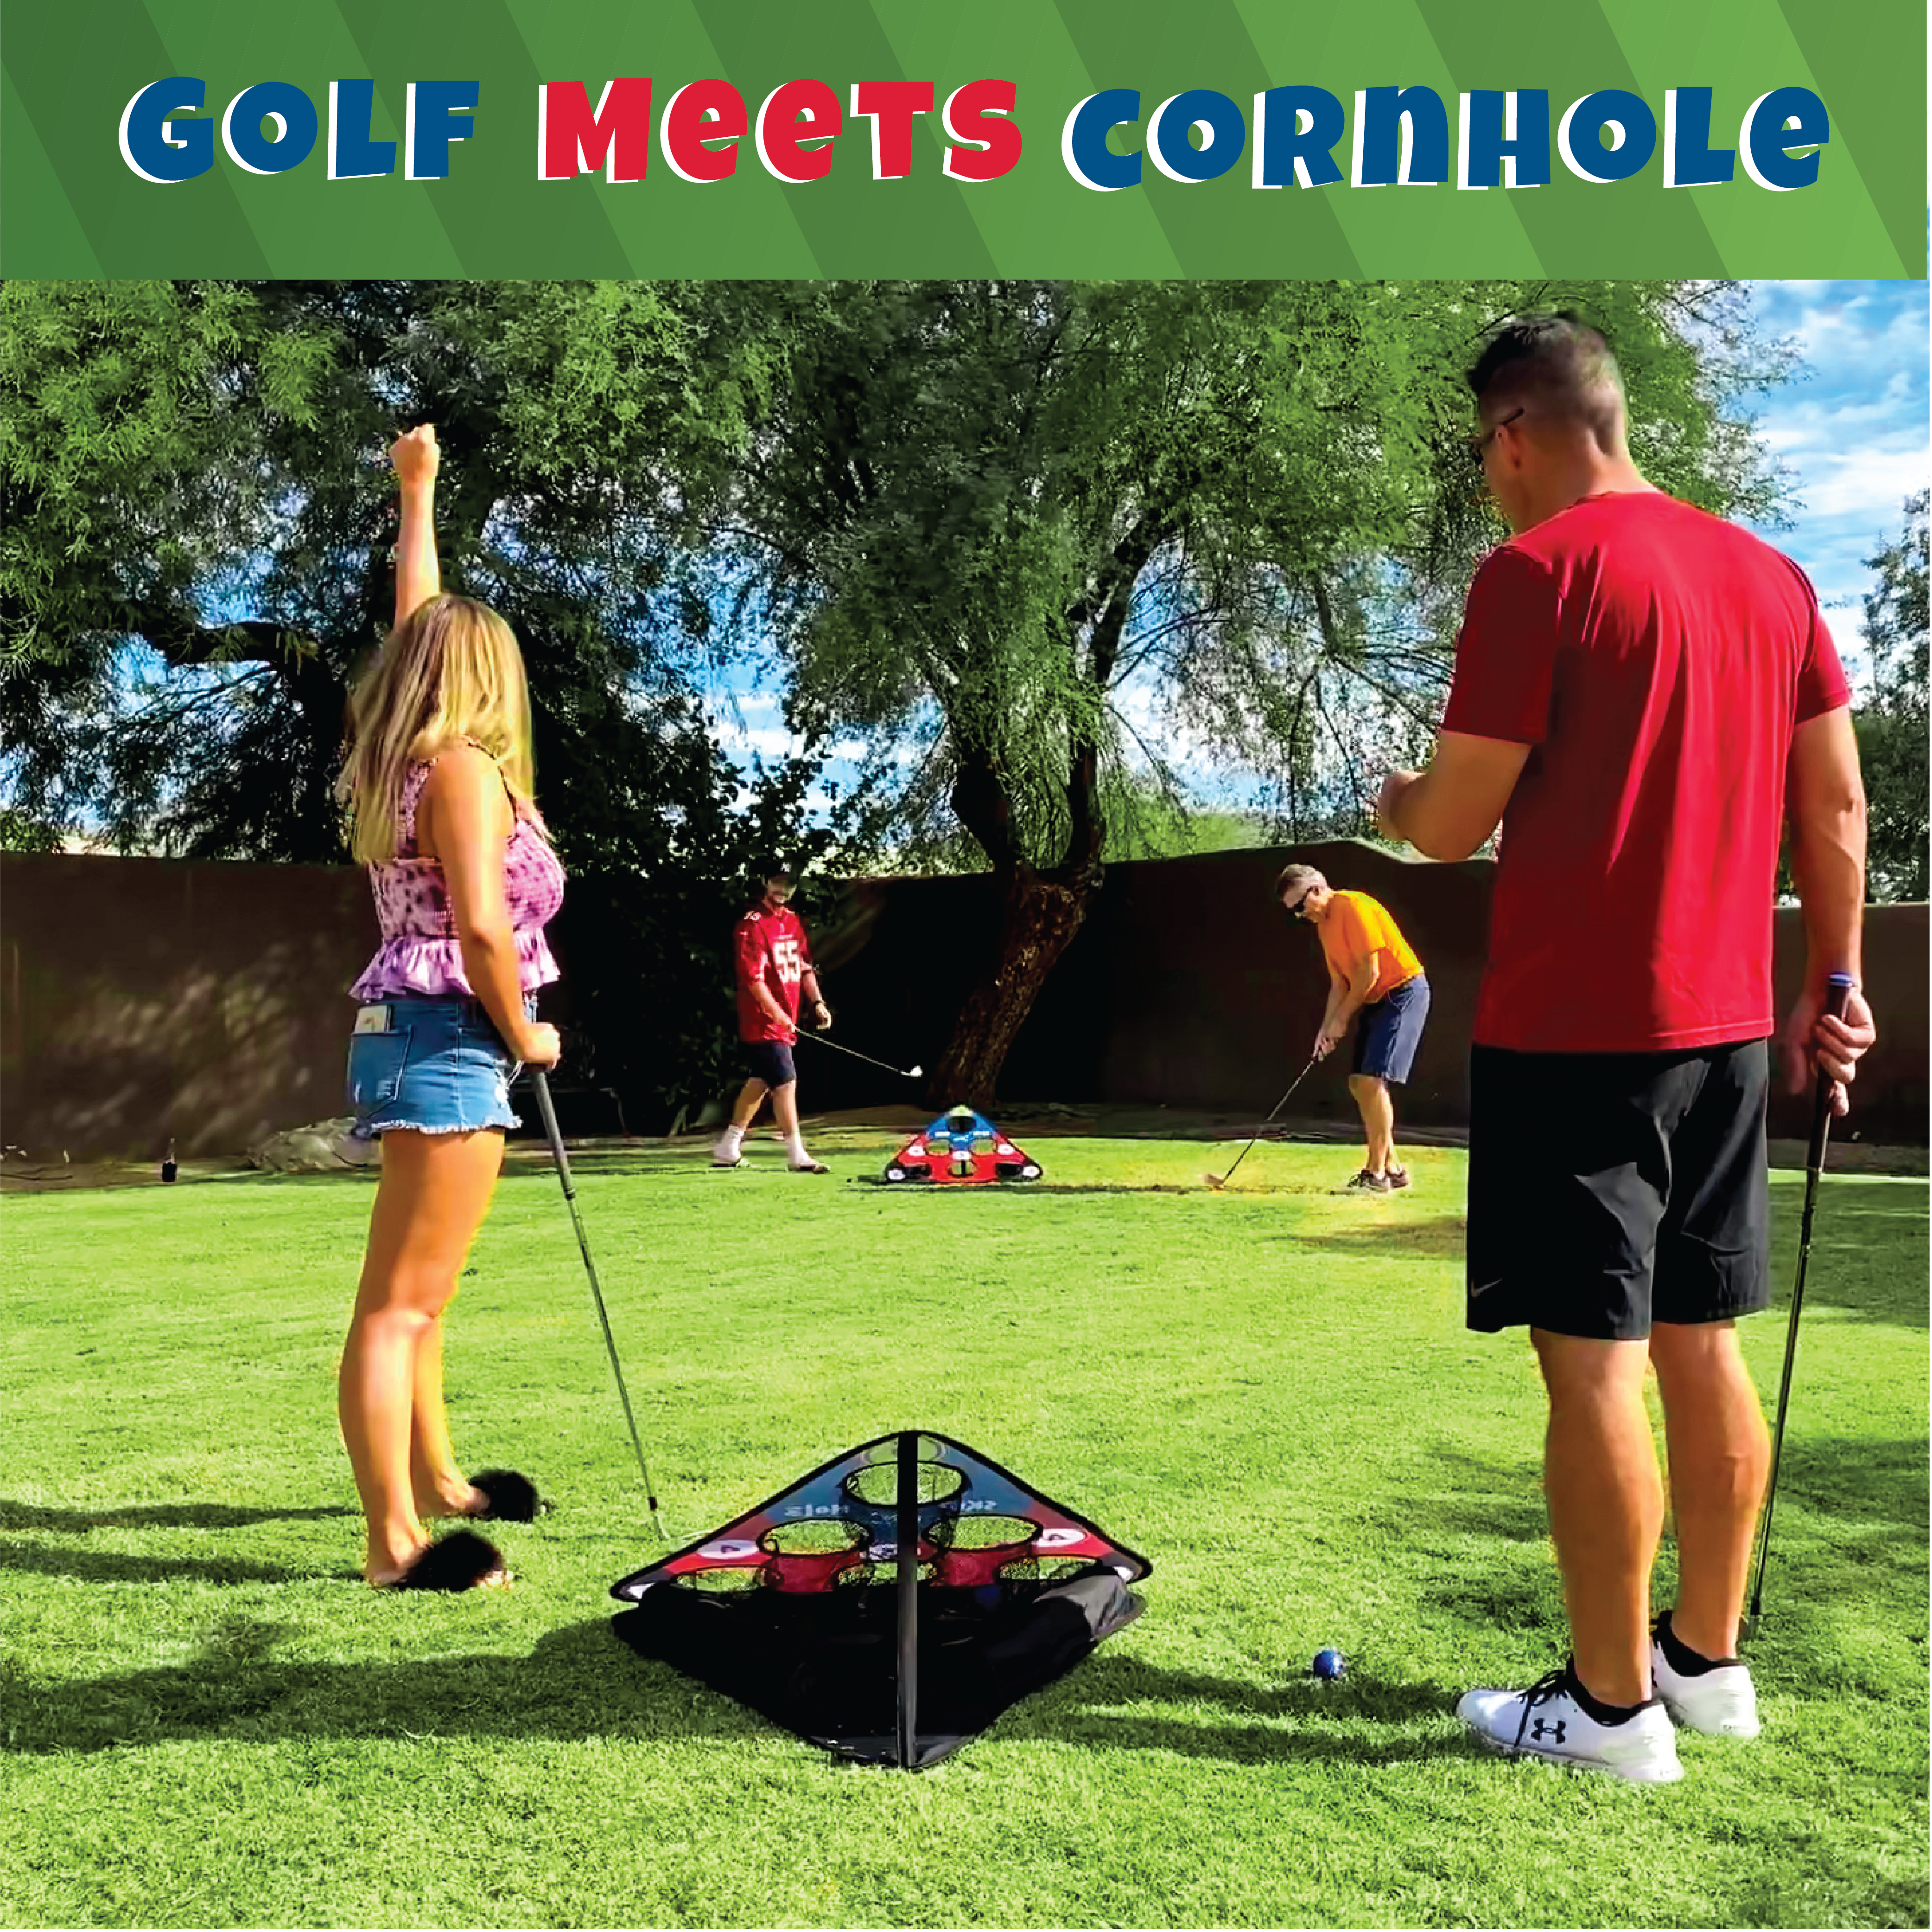 SCORE NN' HOLE ALL-IN-1 GAME SET | Includes stone skipping, golf, cornhole, ROLL NN' HOLE, beer pong, and more!